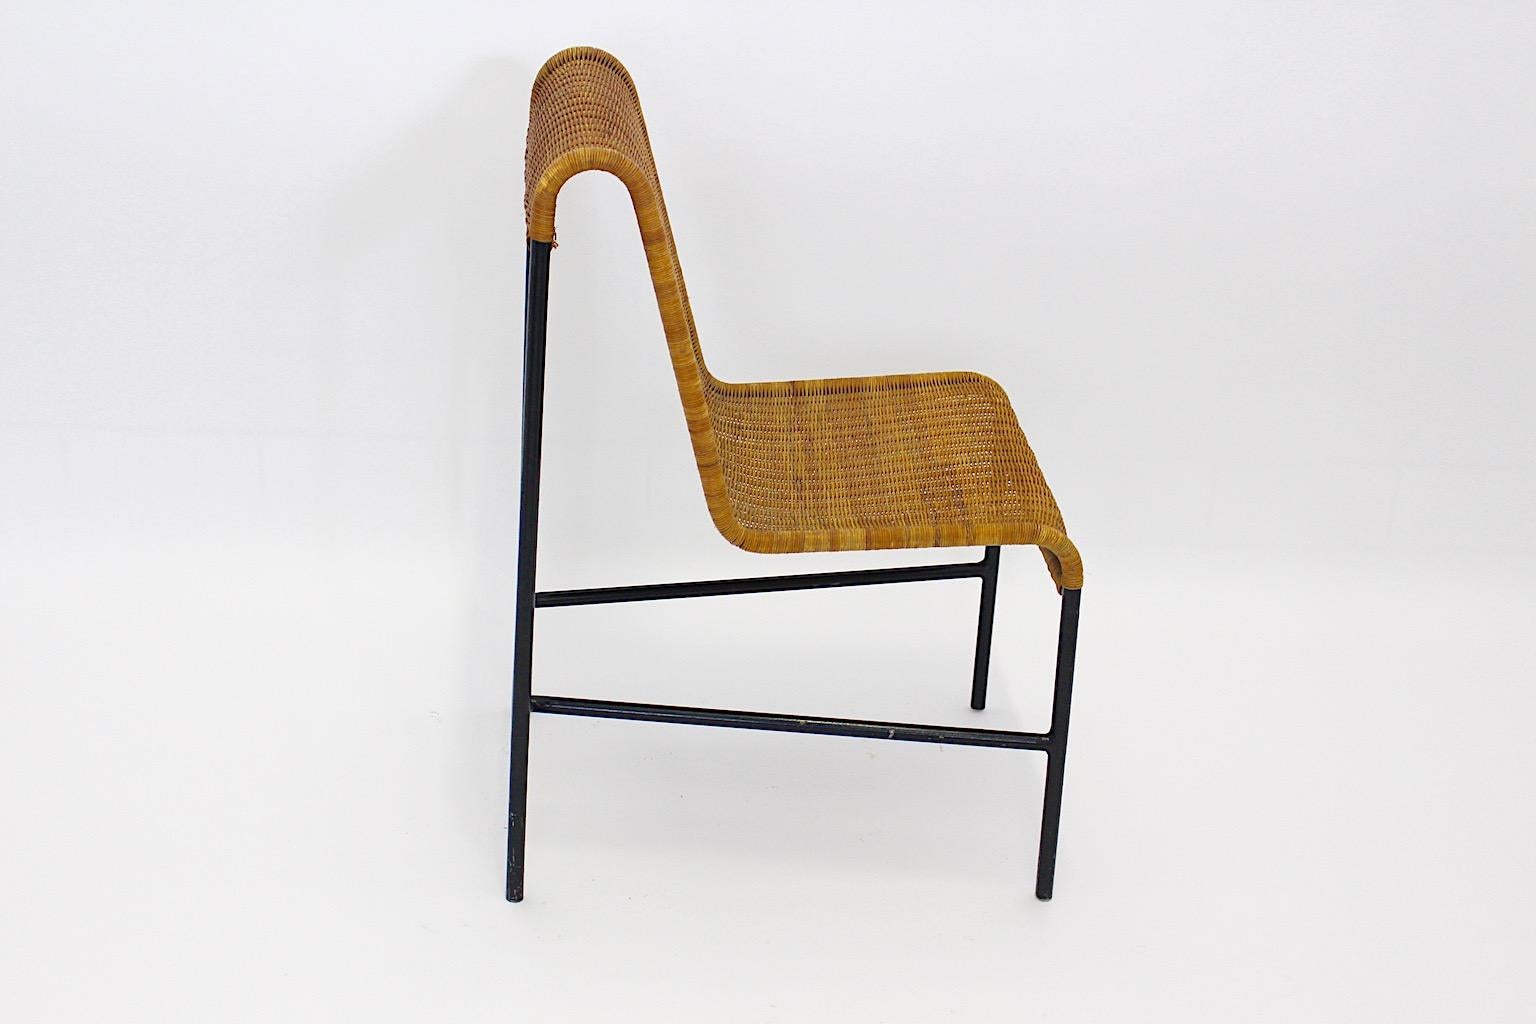 Organic Modern Mid Century Modern vintage chair or side chair from black lacquered tubular steel and wickerwork. by Harold Cohen and Davis Pratt, 1953 USA.
This chair or side chair is a wonderful example from Organic Modern design and was designed